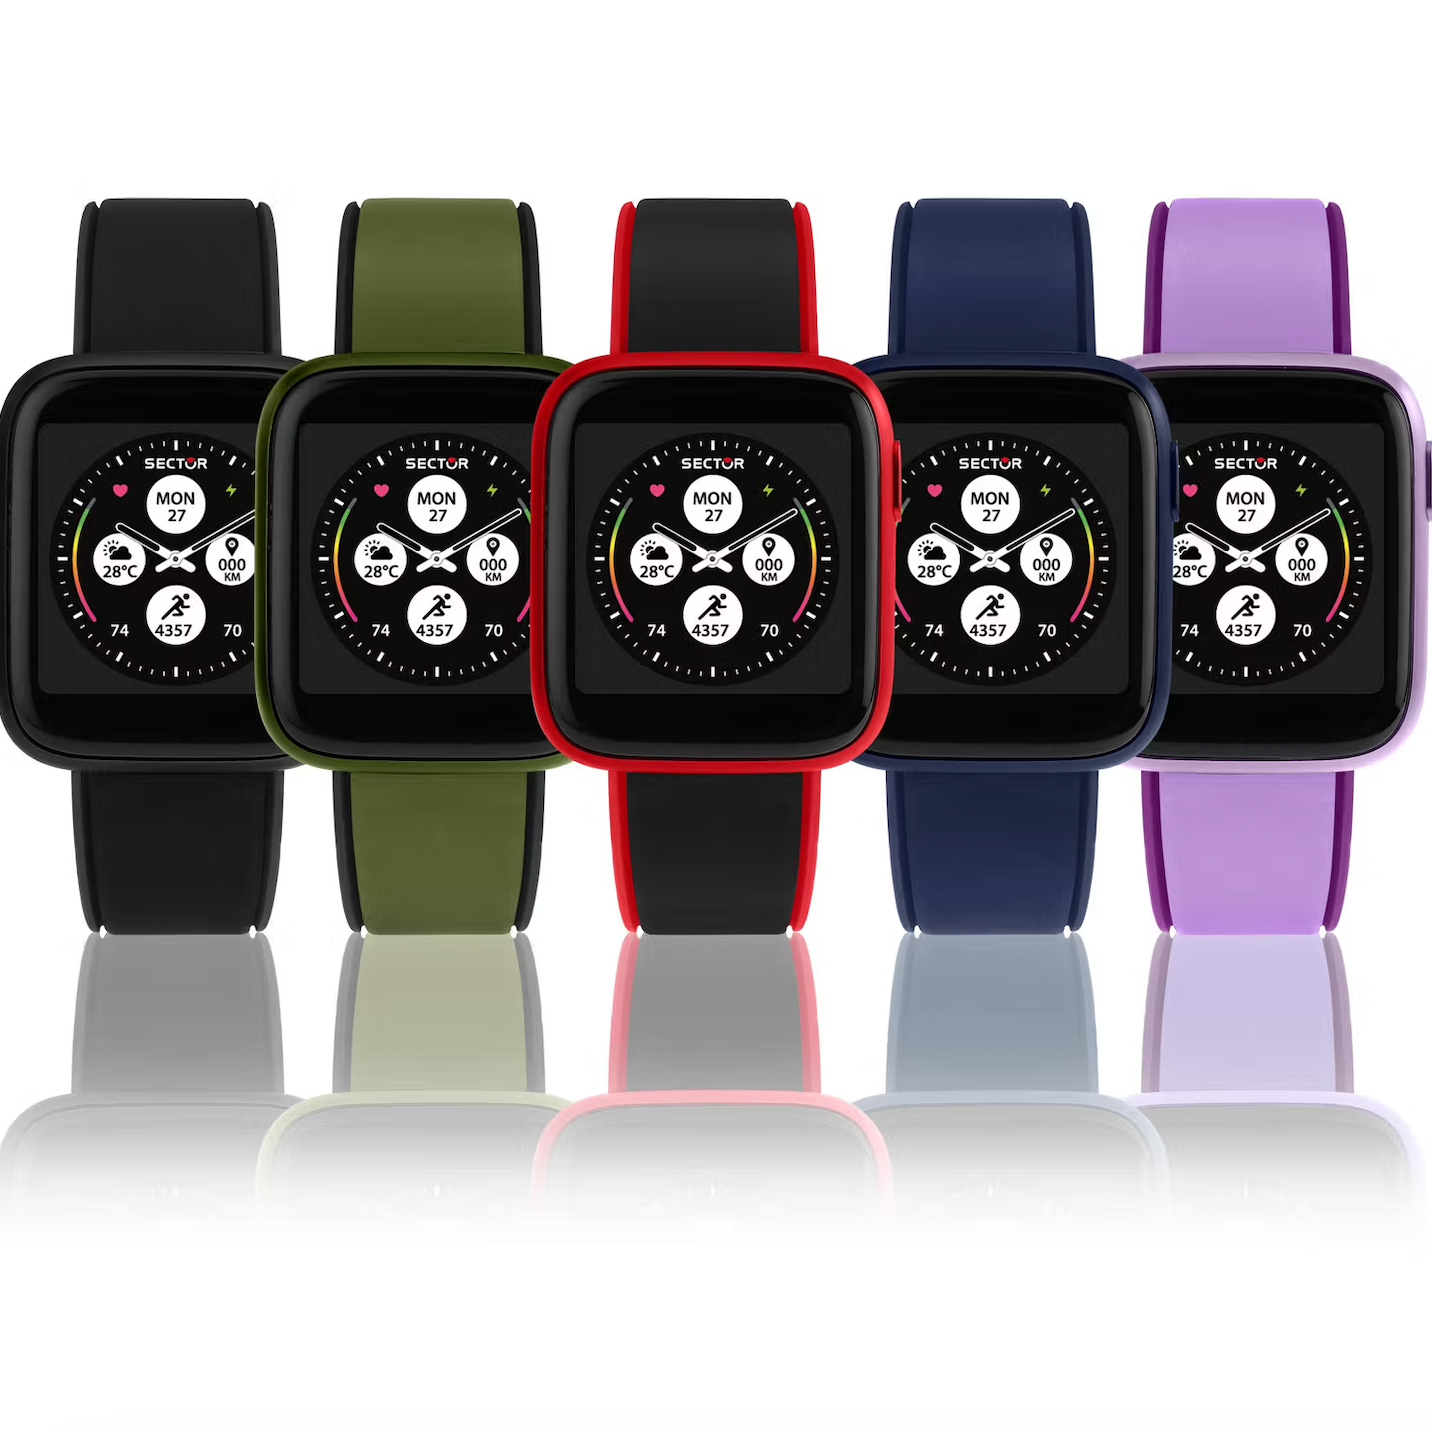 SMARTWATCH HOMME SECTOR S-04 COLOURS R3253158009